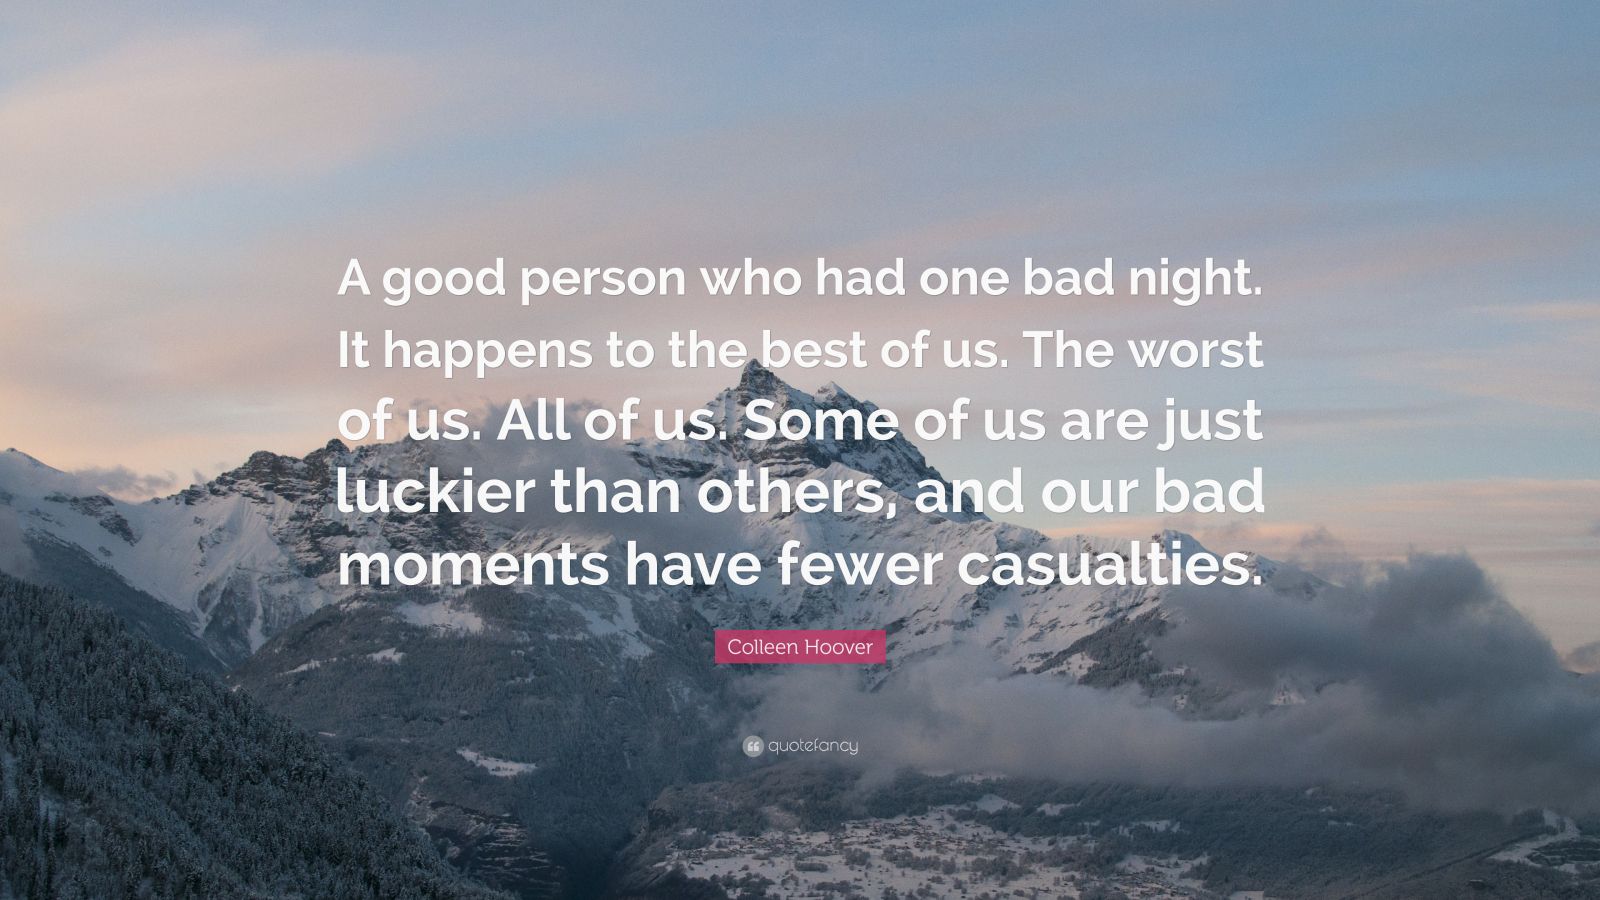 Colleen Hoover Quote: “A good person who had one bad night. It happens to  the best of us. The worst of us. All of us. Some of us are just lucki”